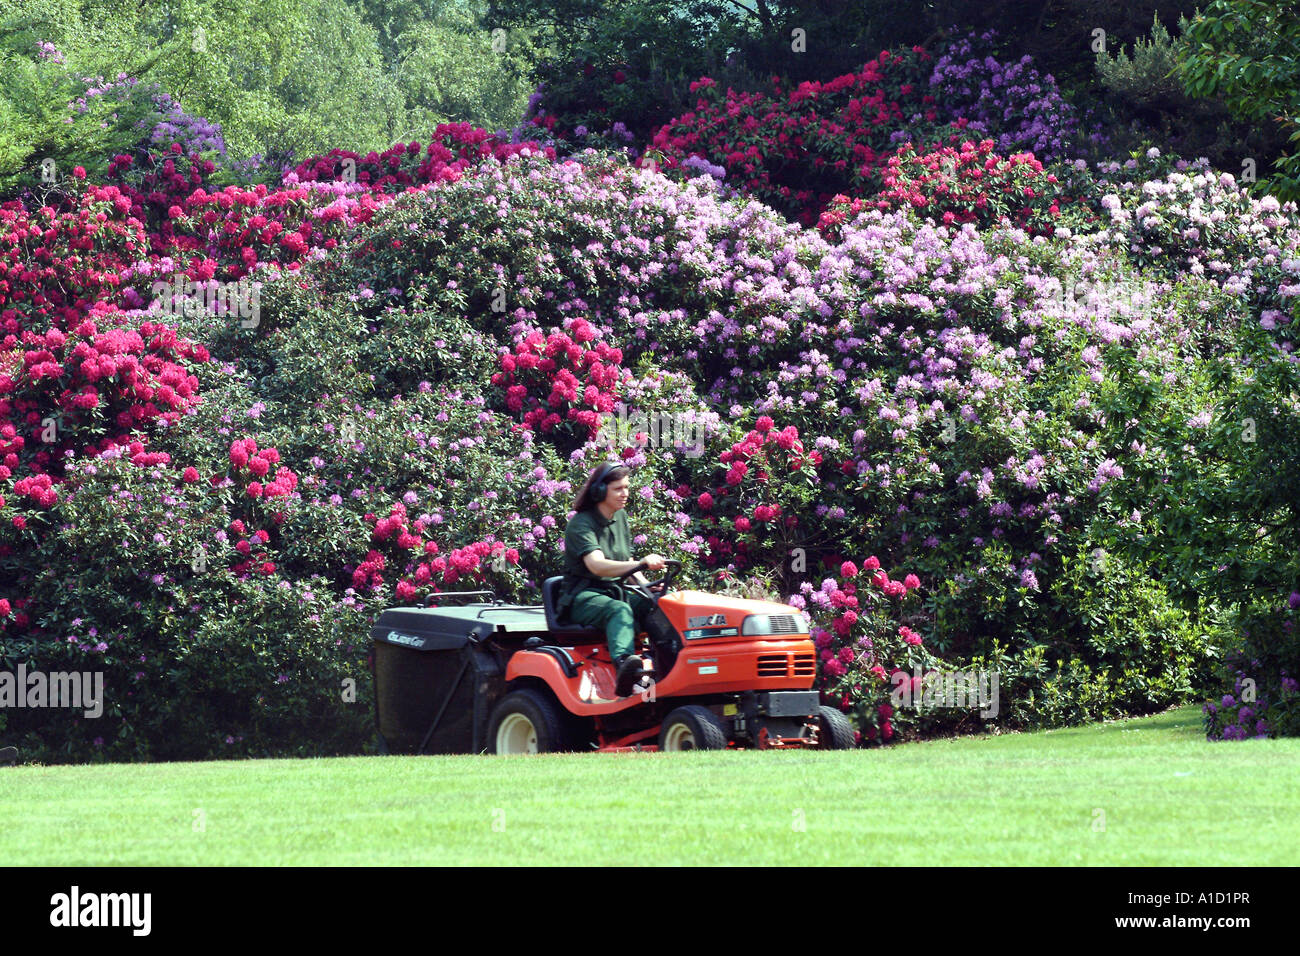 Large rhododendron bushes with gardener on lawn tractor Stock Photo